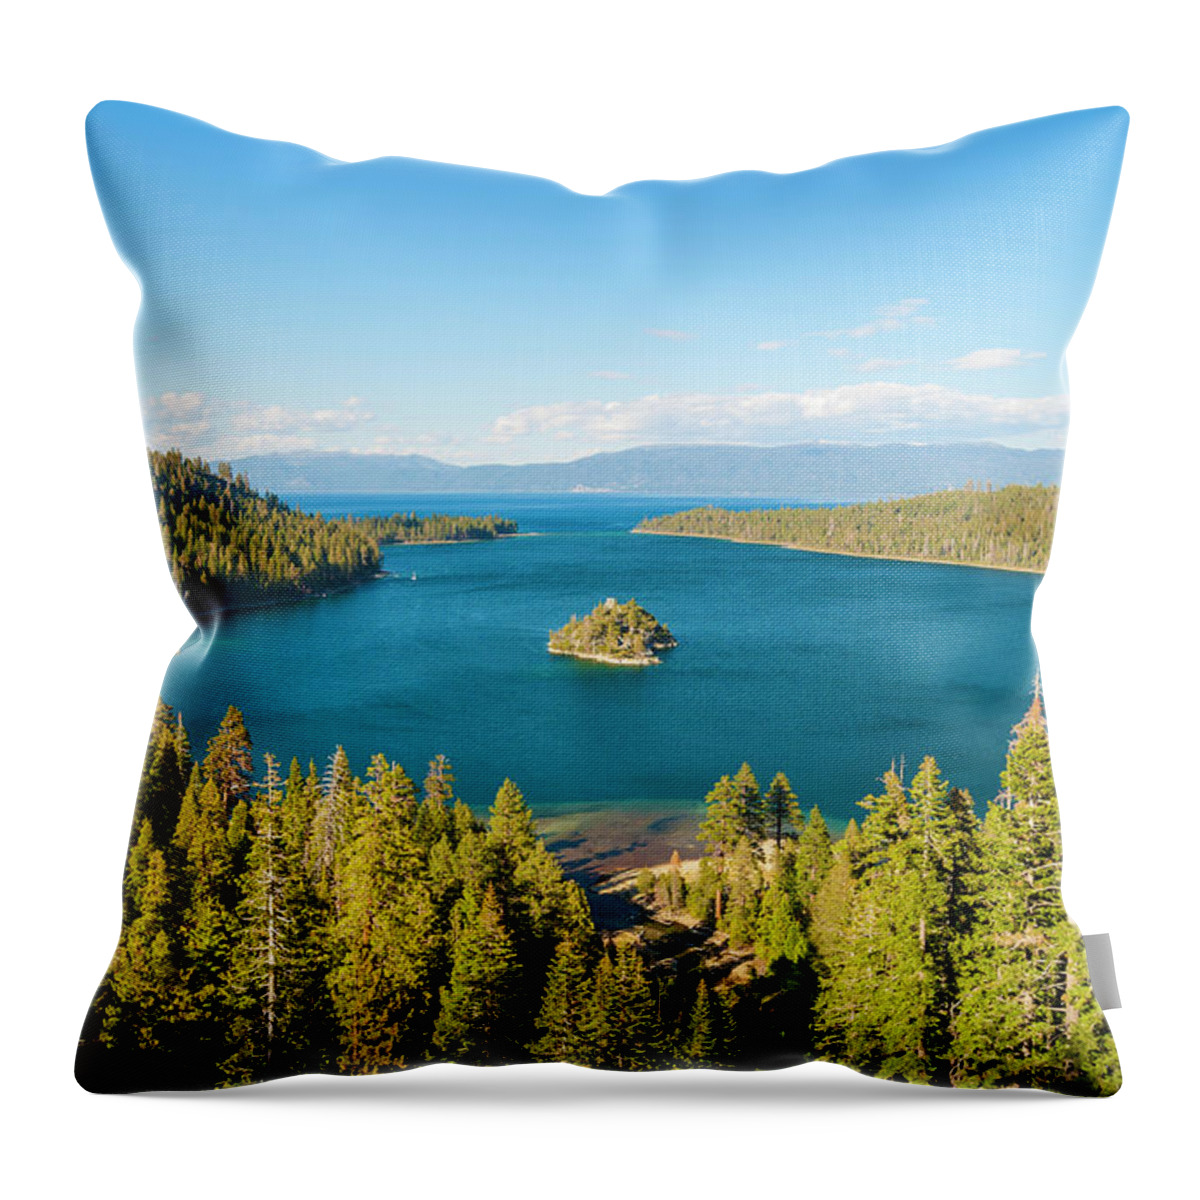 Tranquility Throw Pillow featuring the photograph Fannette Island In Emerald Bay, Lake by Stuart Dee